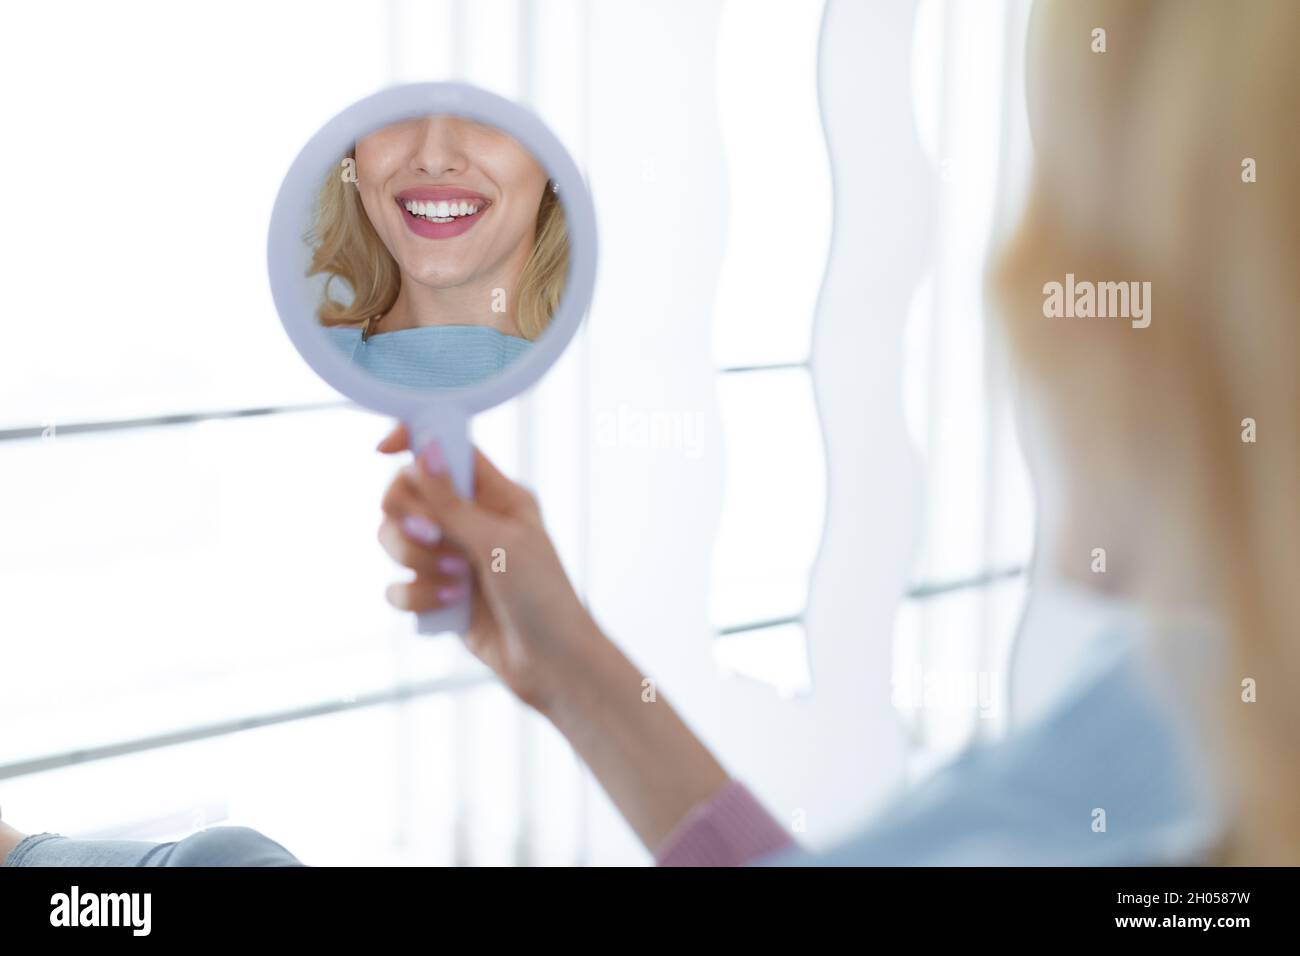 Female patient looking at her beautiful healthy white smile in dental mirror reflection, unrecognizable happy young lady checking results of treatment Stock Photo